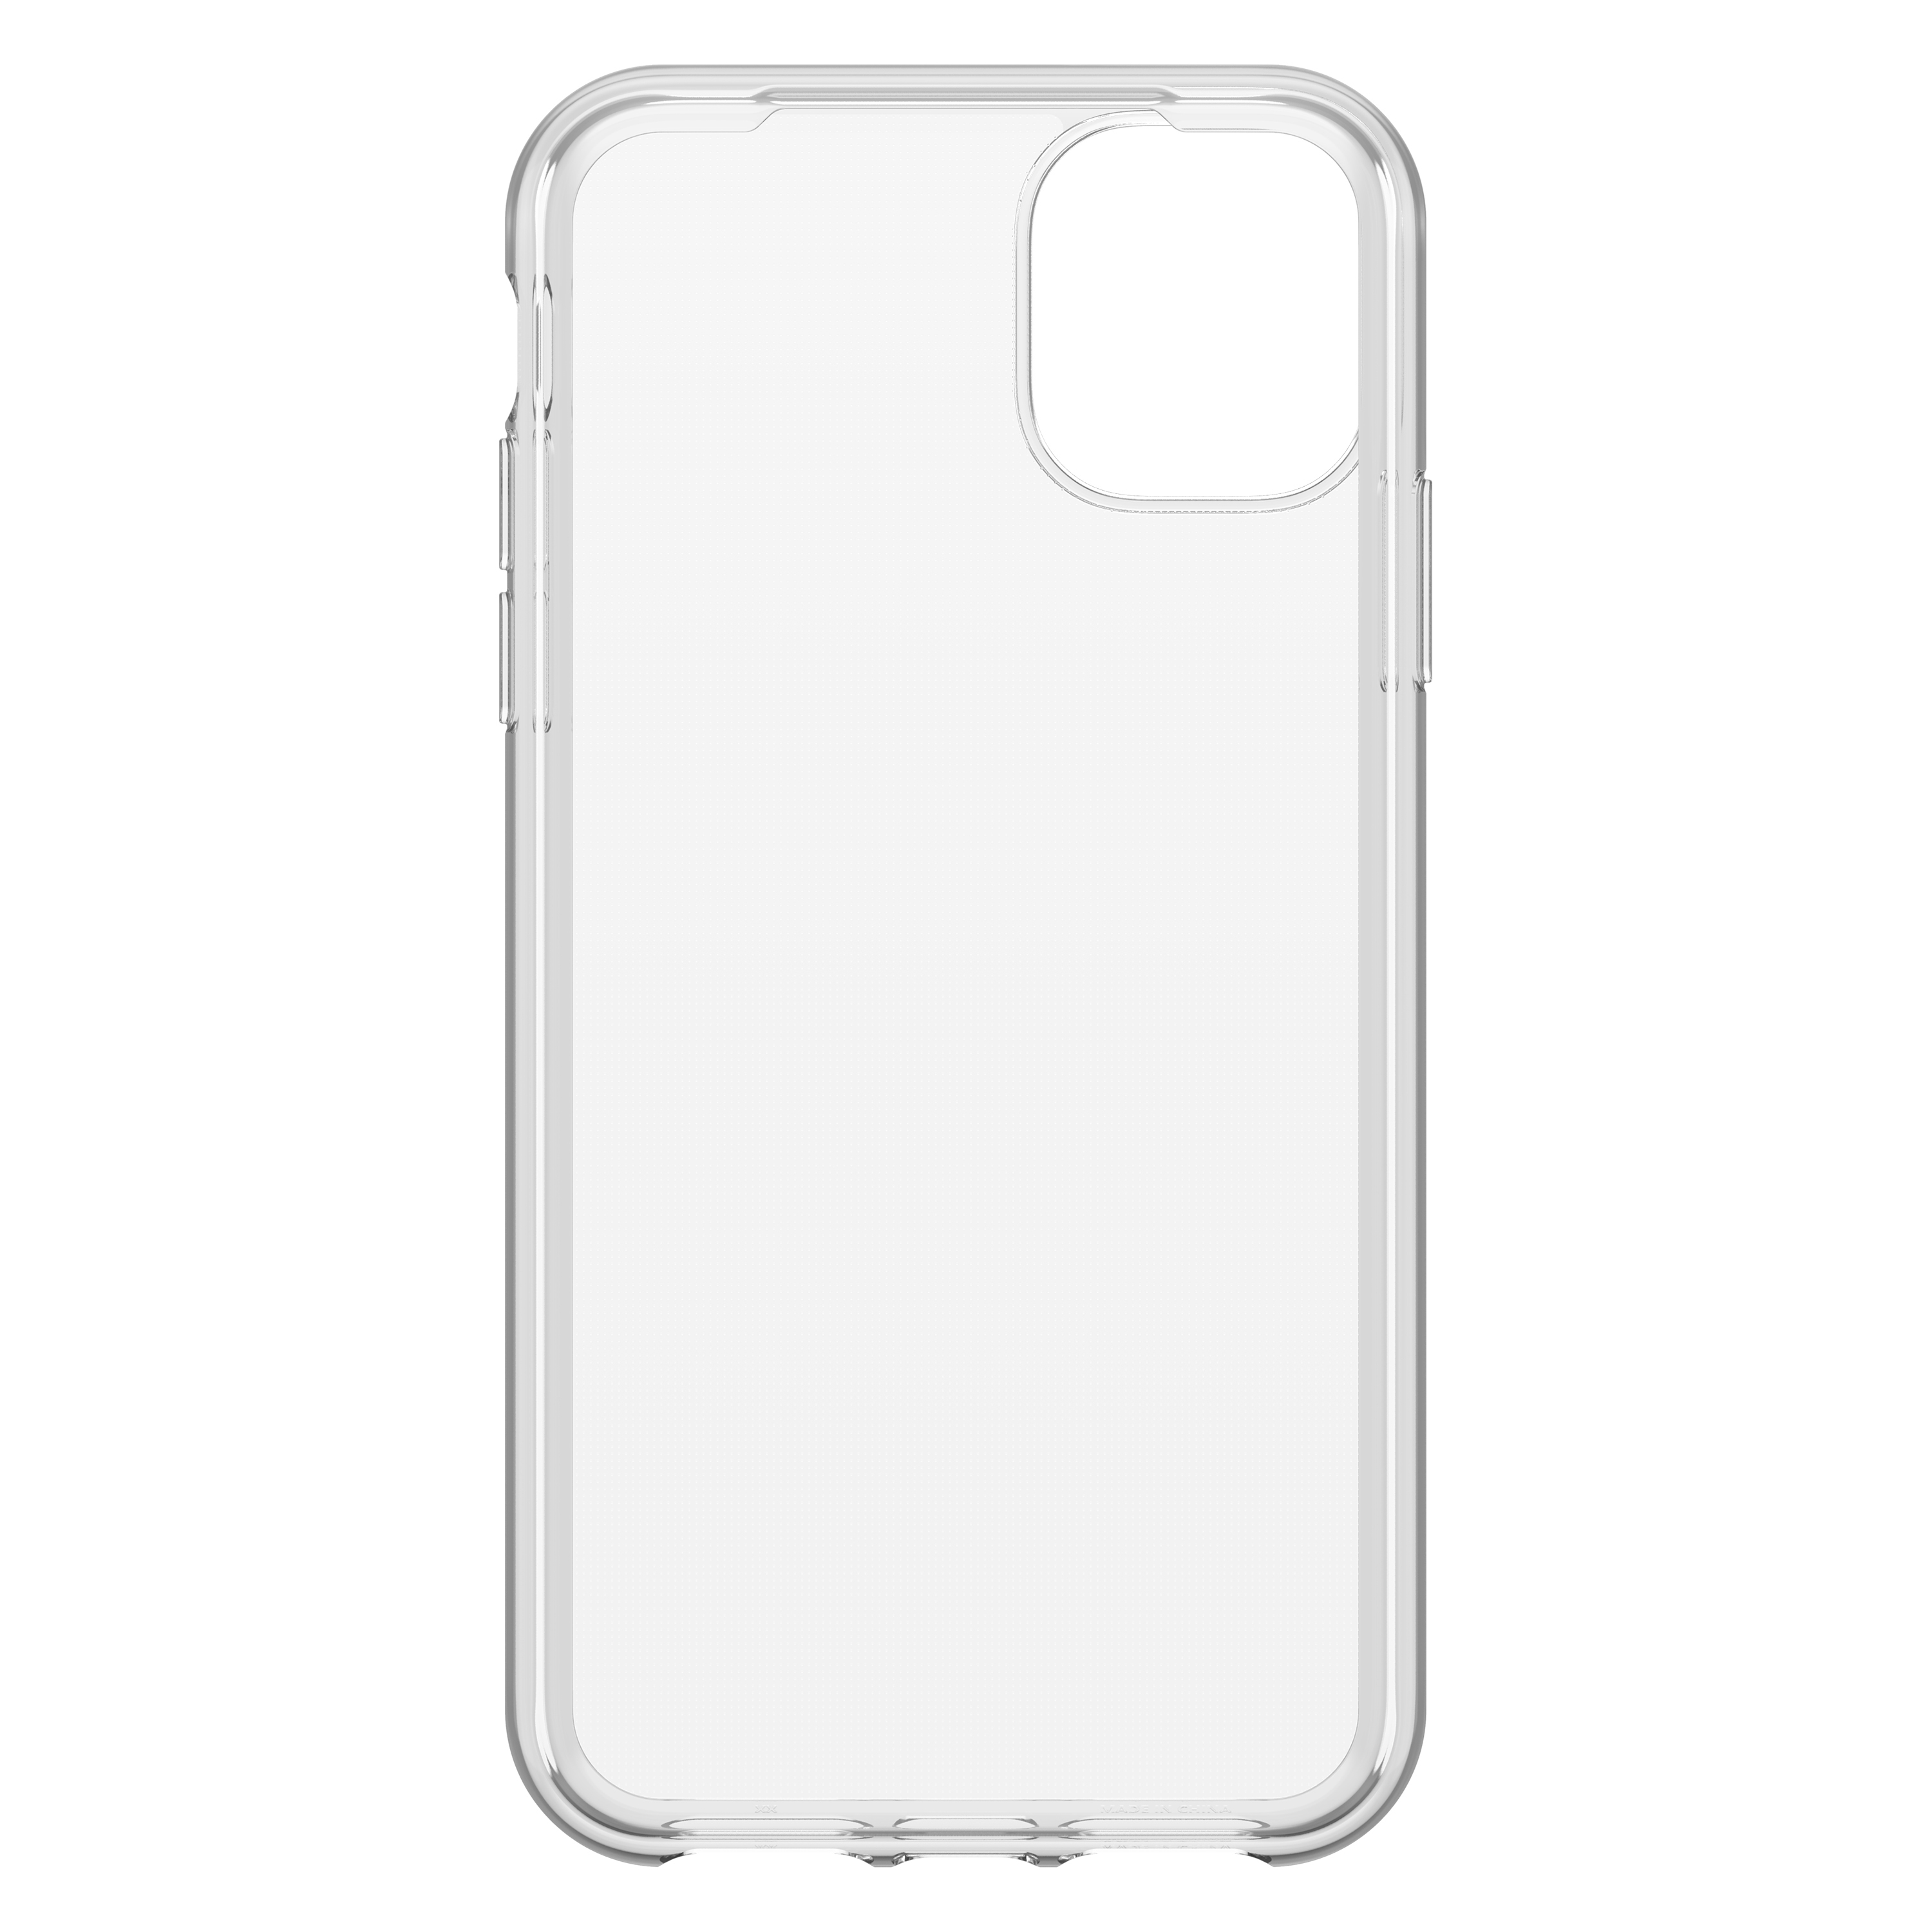 OTTERBOX Clearly iPhone Backcover, 11, Protected Skin, Transparent Apple